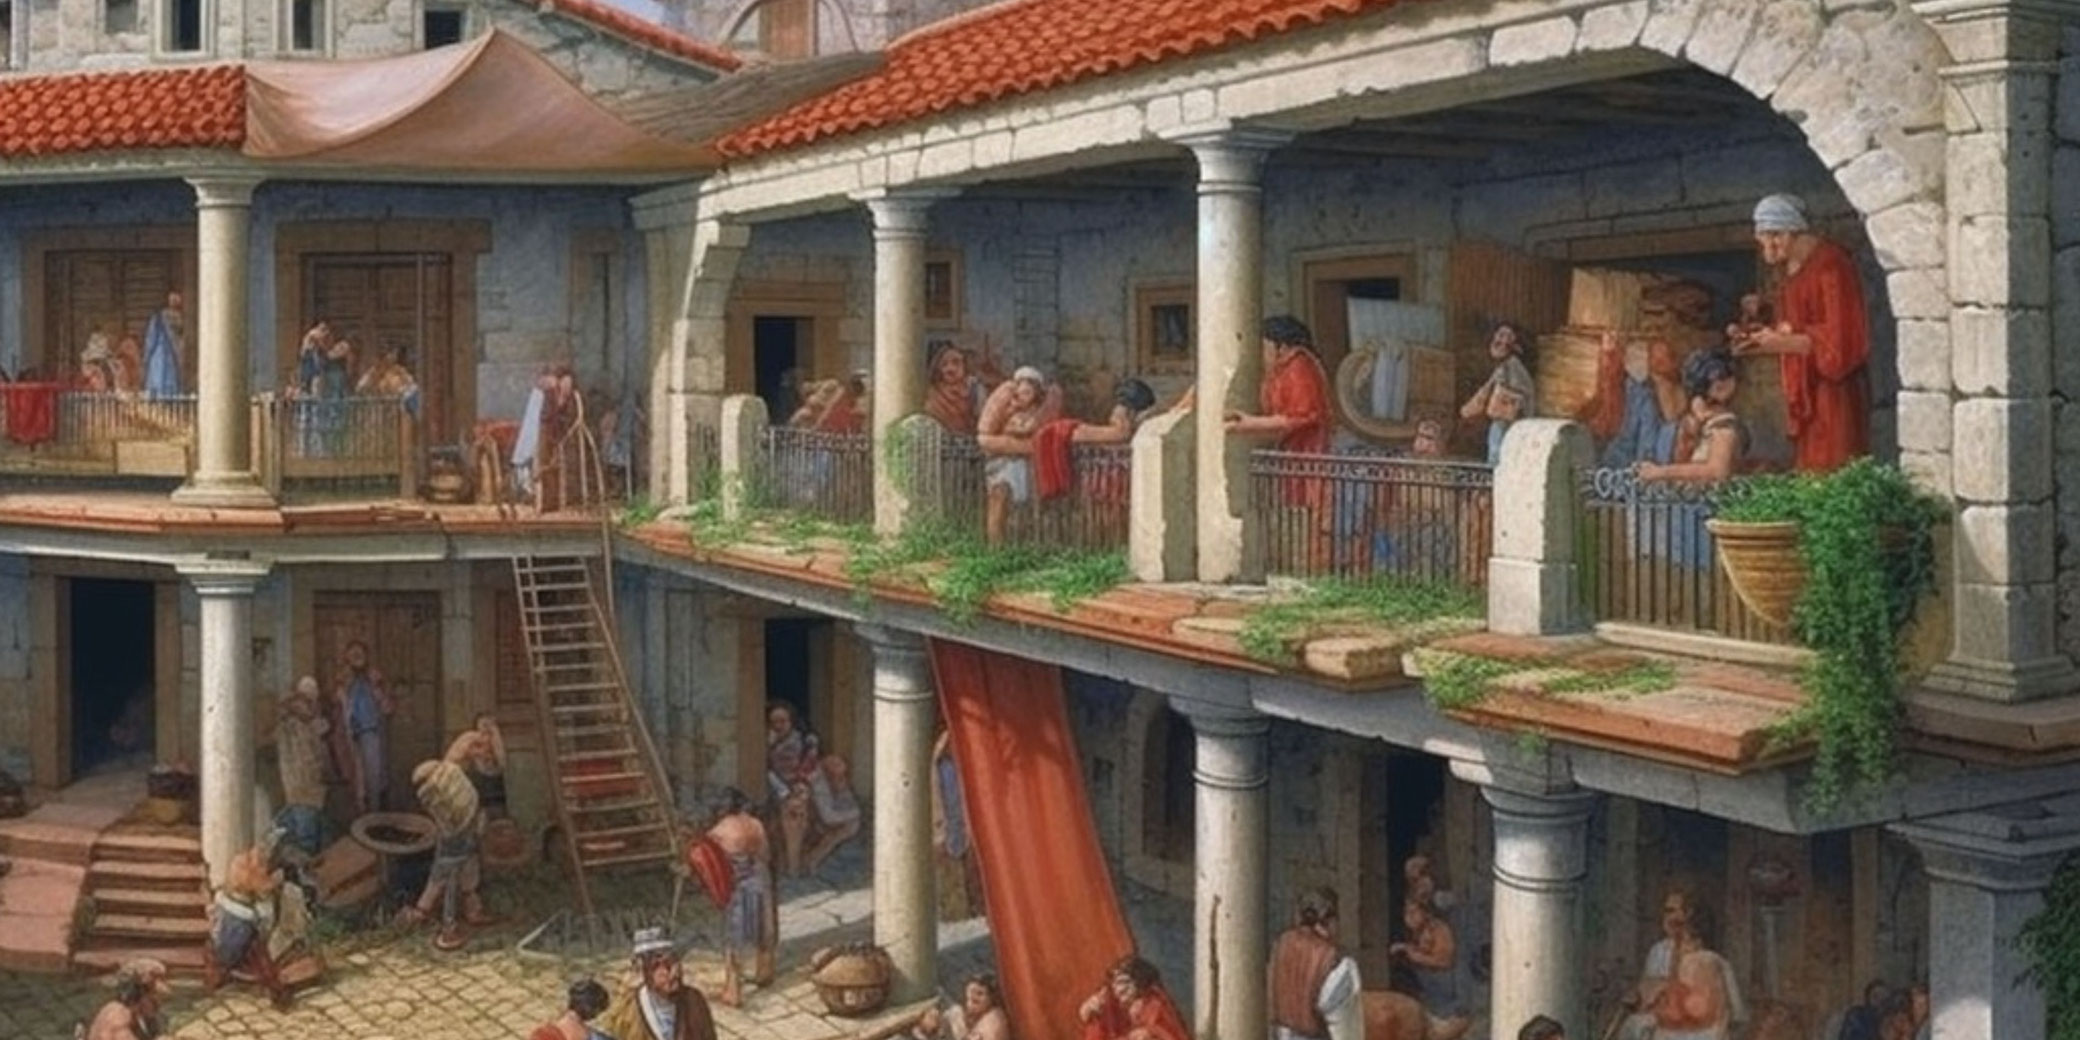 What was it like to live in an ancient Roman villa?